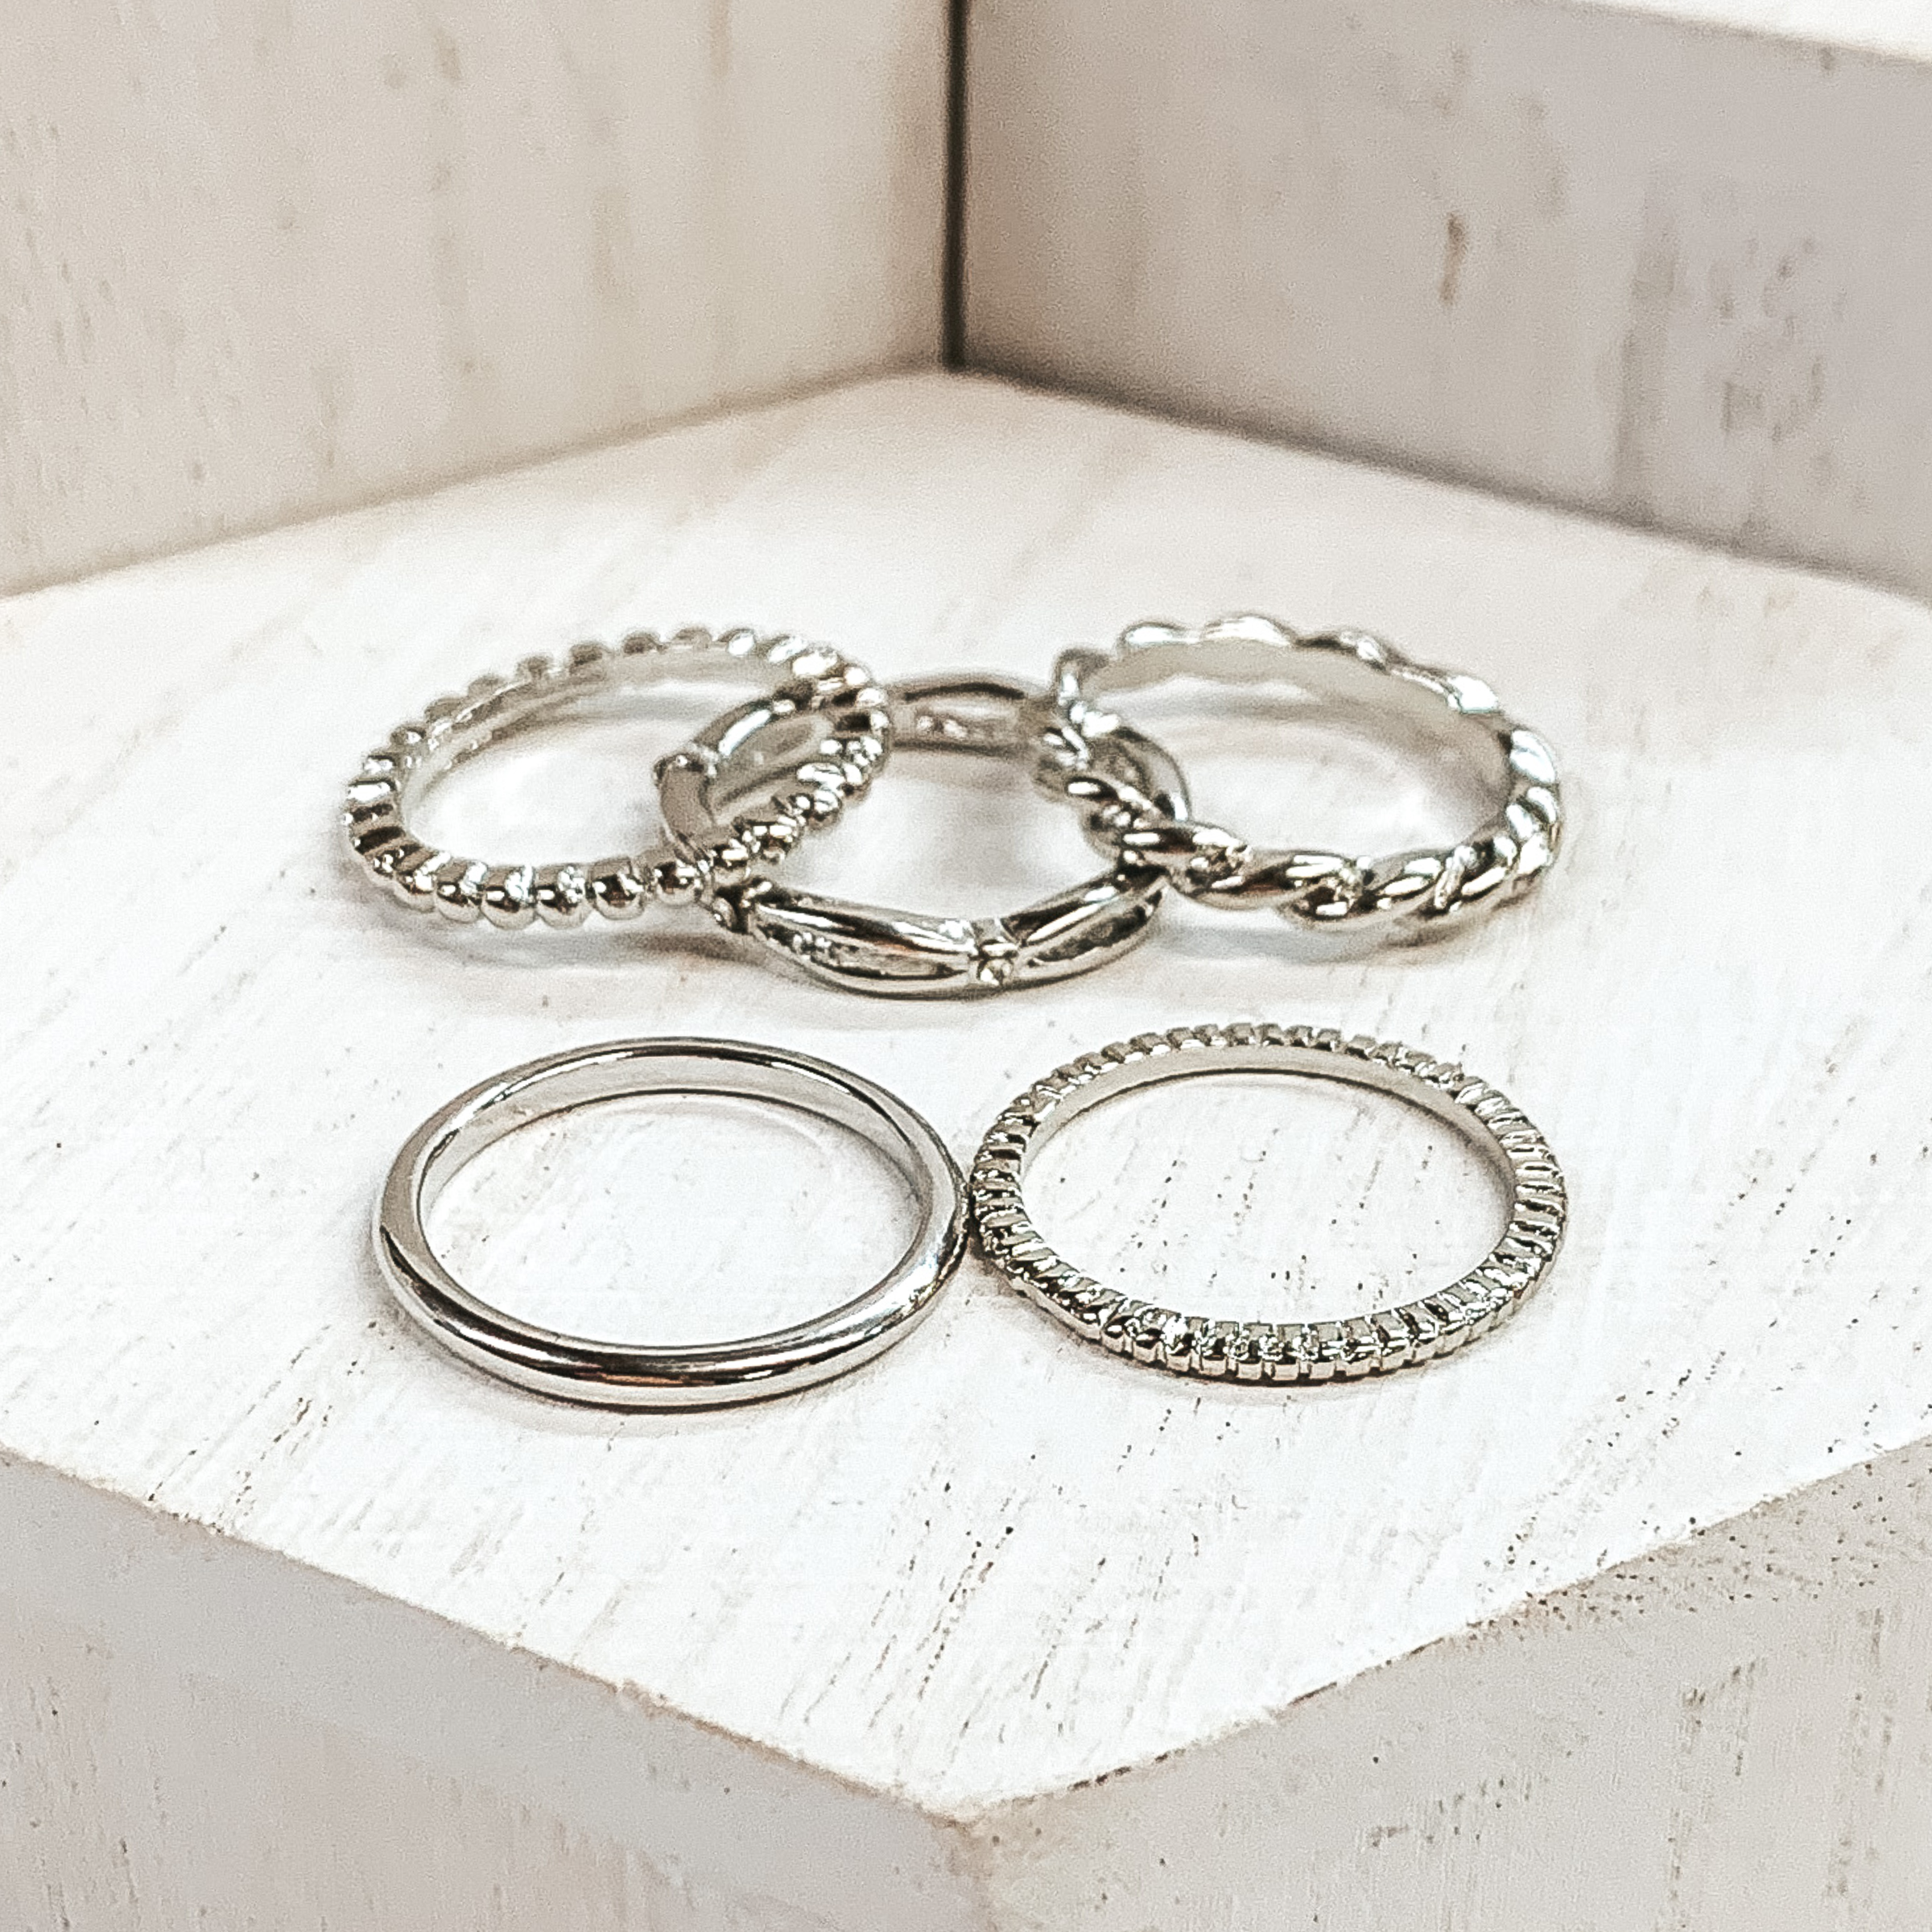 Set of five silver rings. One is a plain band, one is a bubble band, one is a twisted band, and the other two are textured bands. These rings are pictured on white blocks.